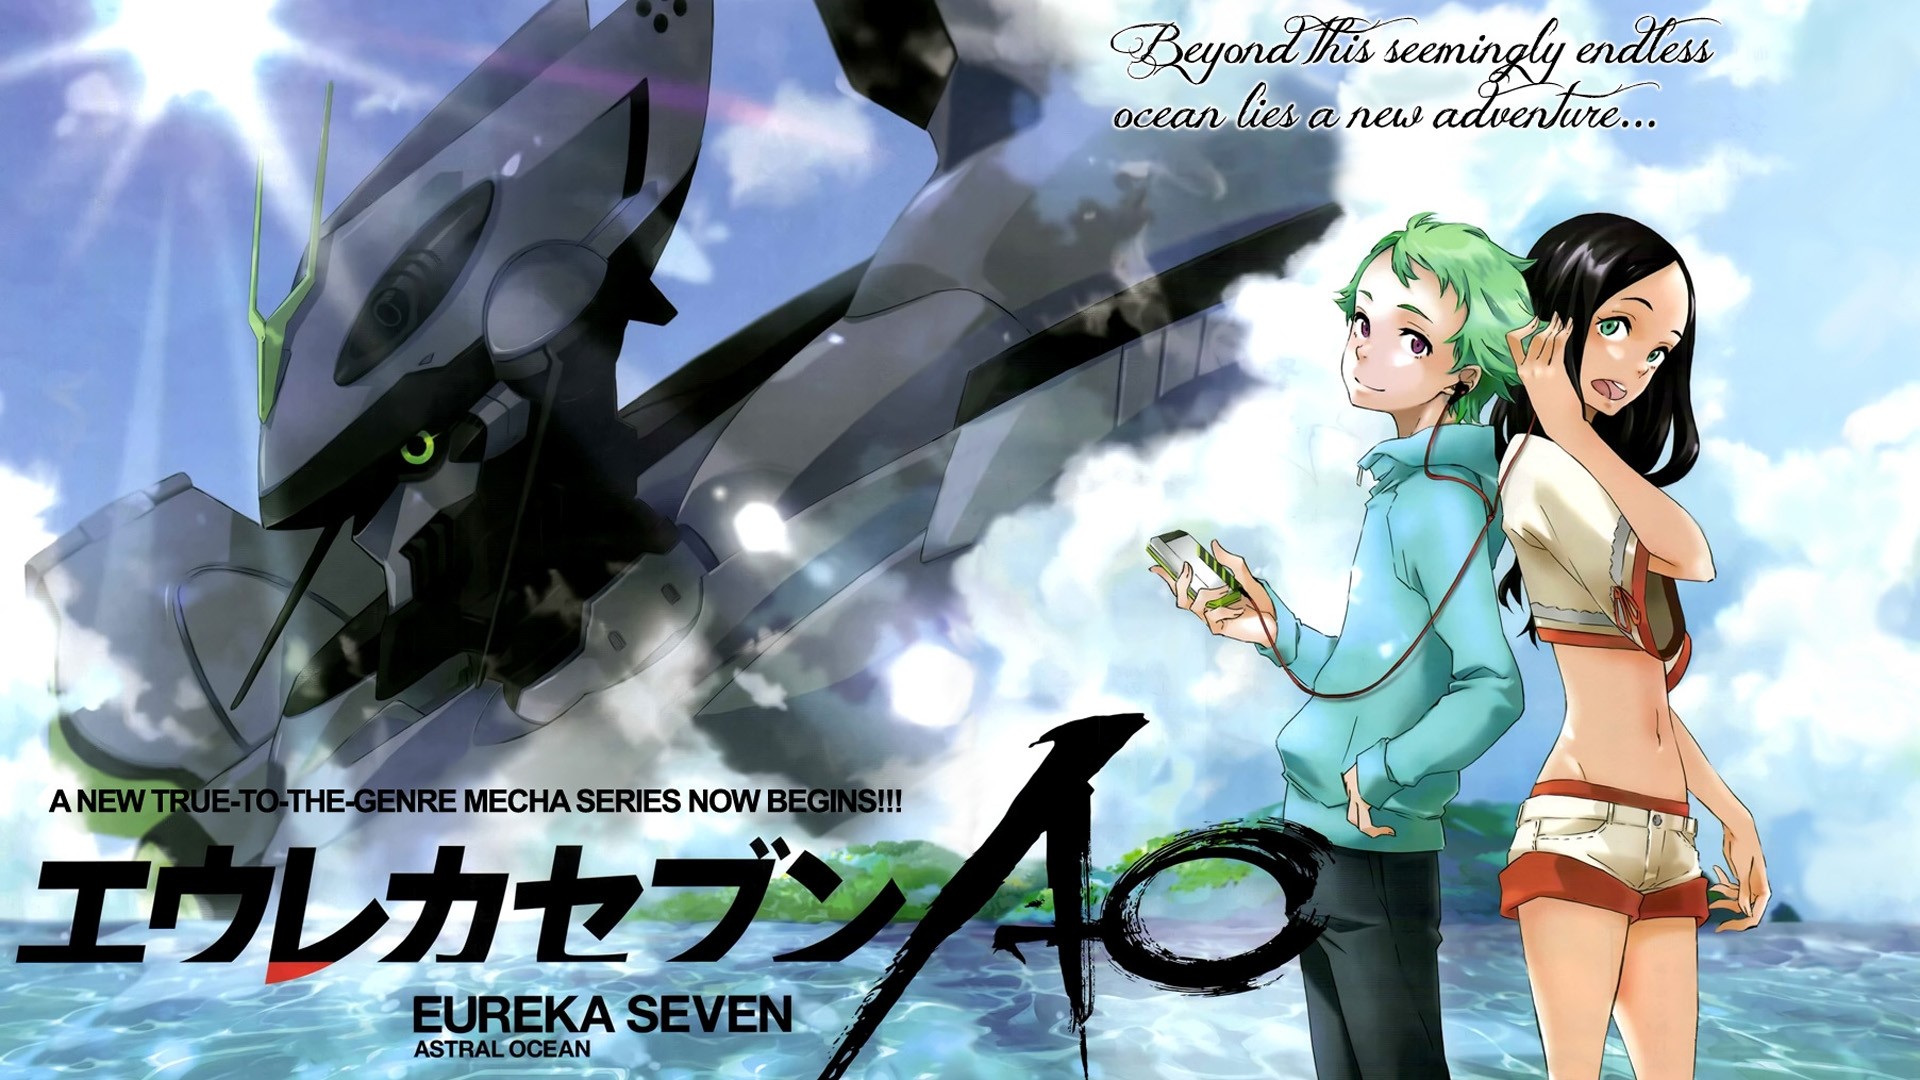 1920x1080 Eureka Seven Source: Keys: anime, eureka seven, television, wallpaper,  wallpapers. Submitted Anonymously 3 years ago